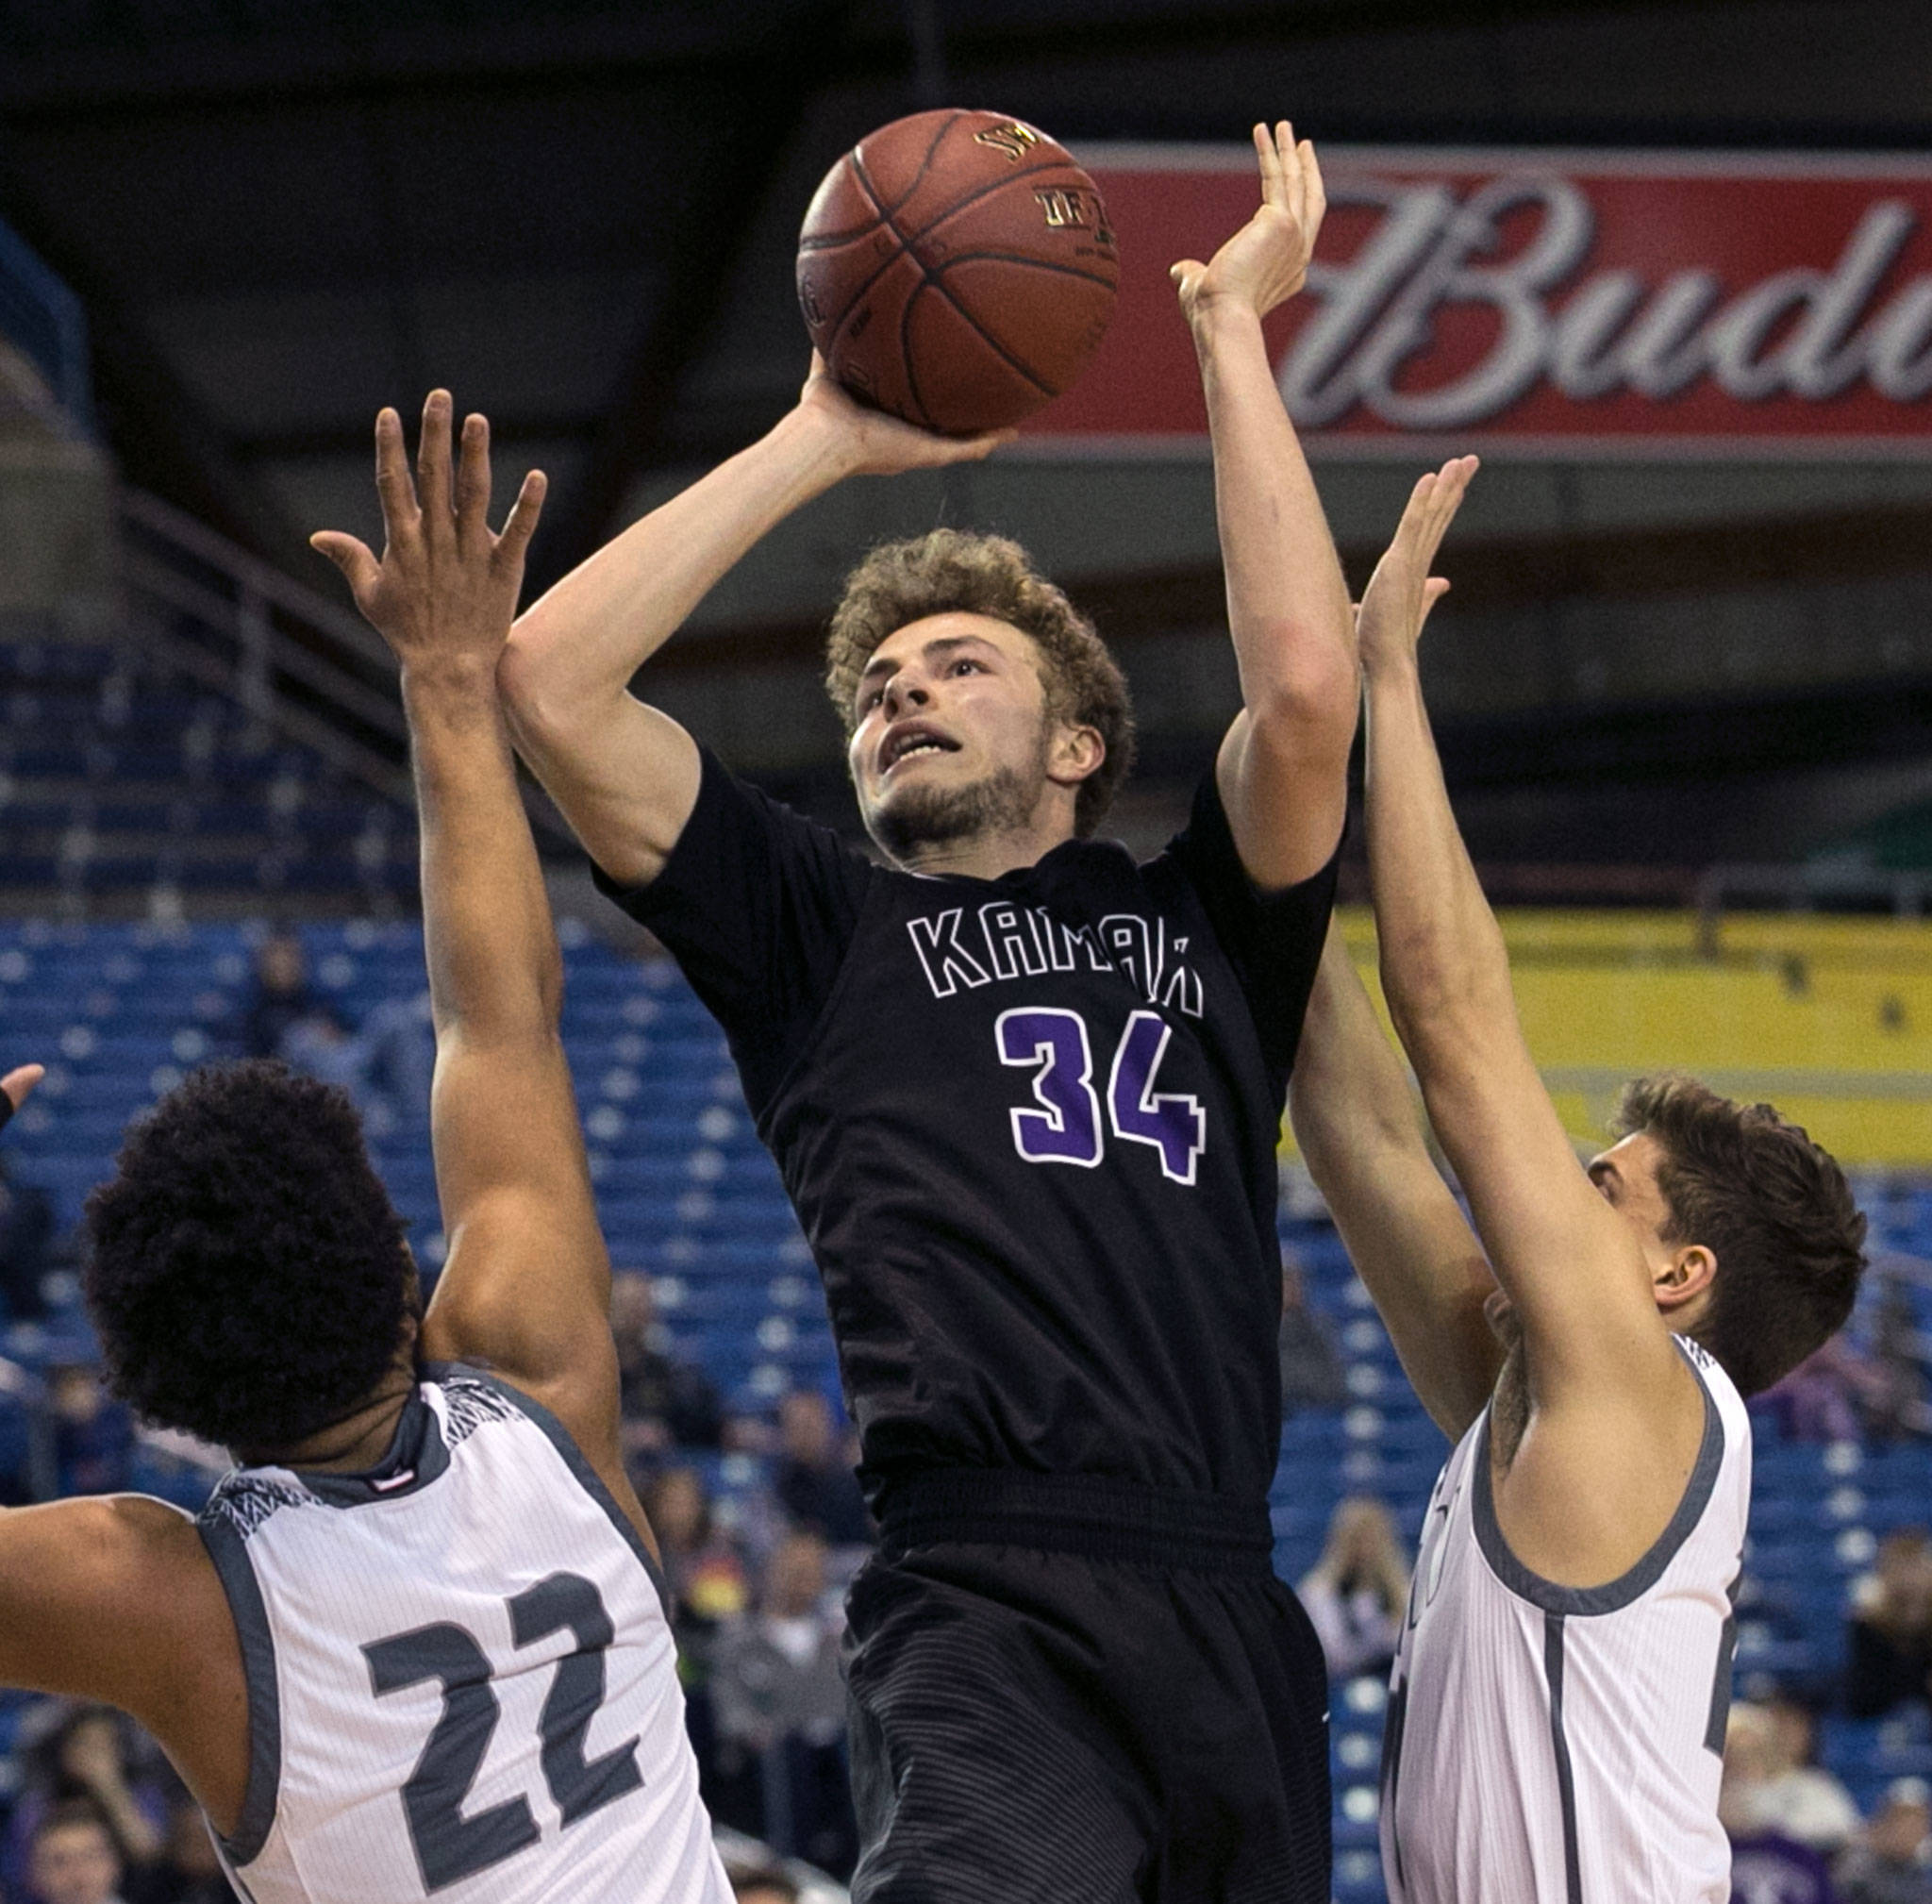 Kamiak’s Daniel Sharpe attempts a shot over Union’s Alishawuan Taylor (left) and Zach Reznick during the 4A Hardwood Classic on Feb. 28, 2018, at the Tacoma Dome. (Kevin Clark / The Herald)